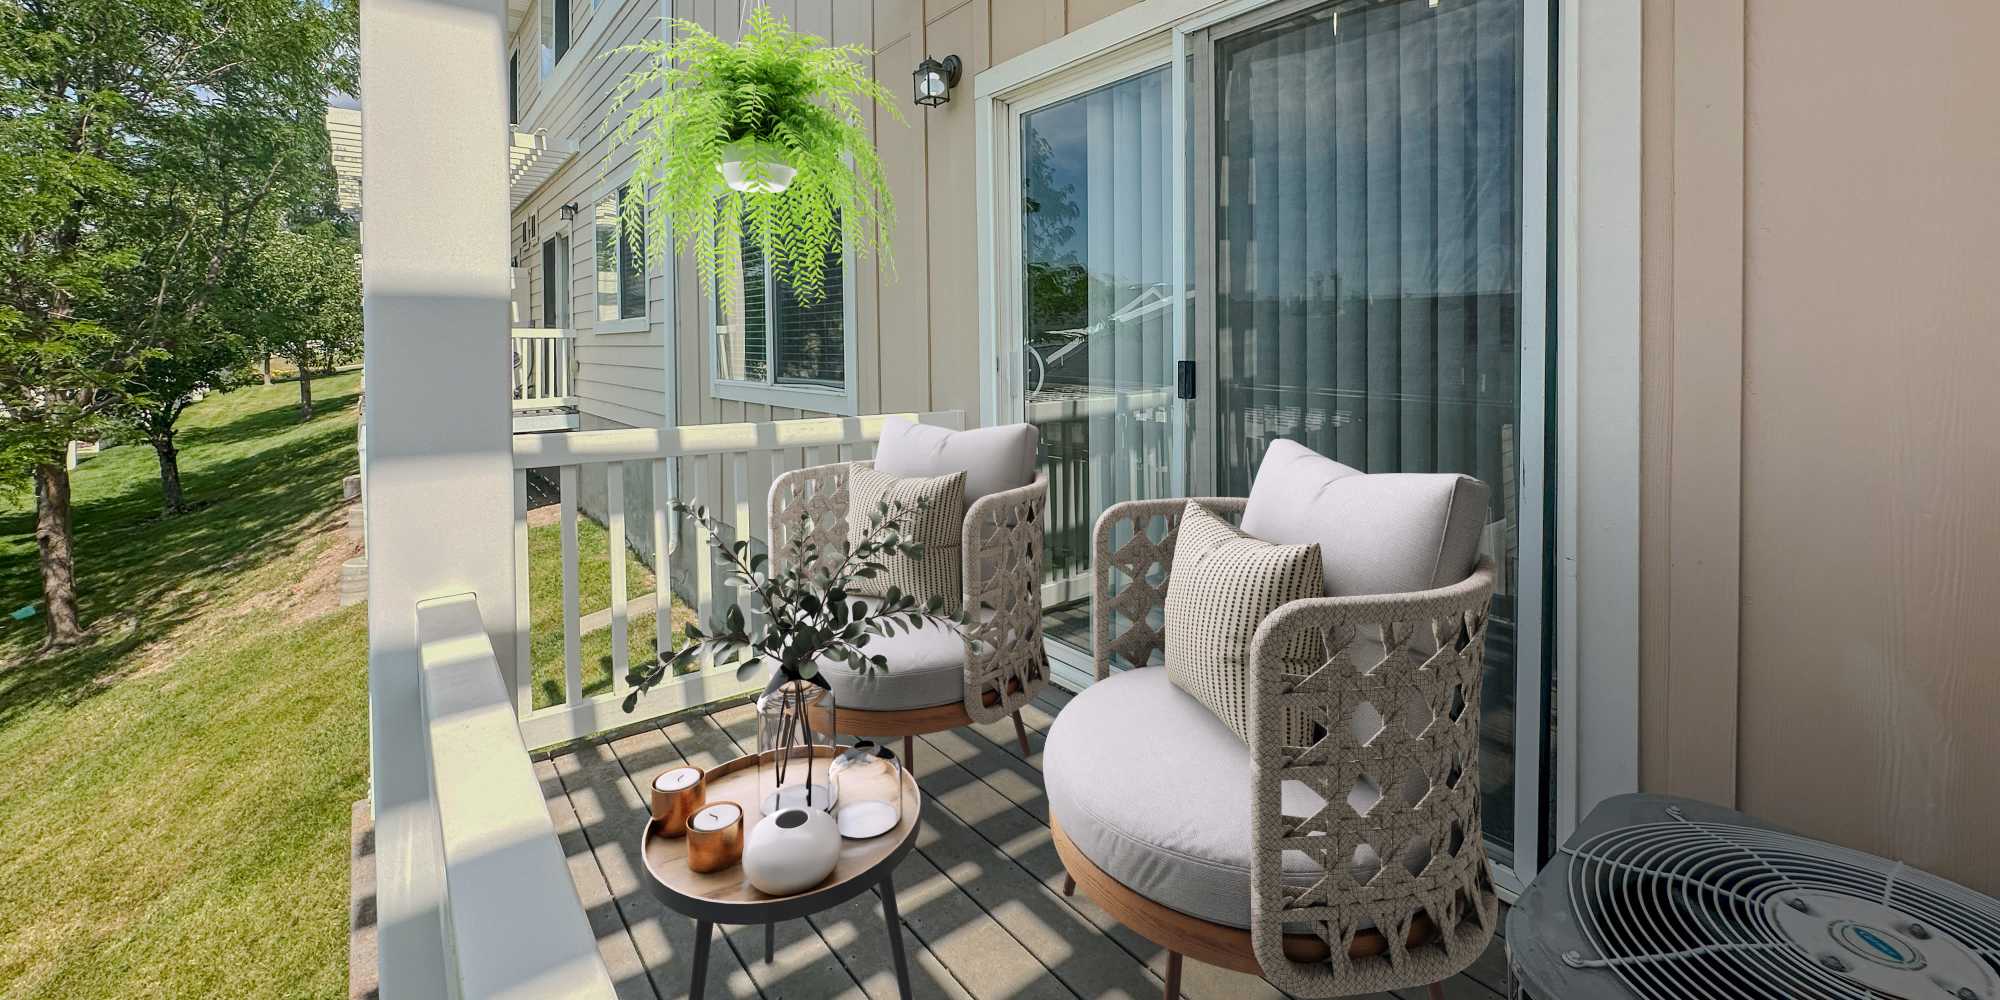 Balcony with two chairs and table at Liberty Hill in Draper, Utah